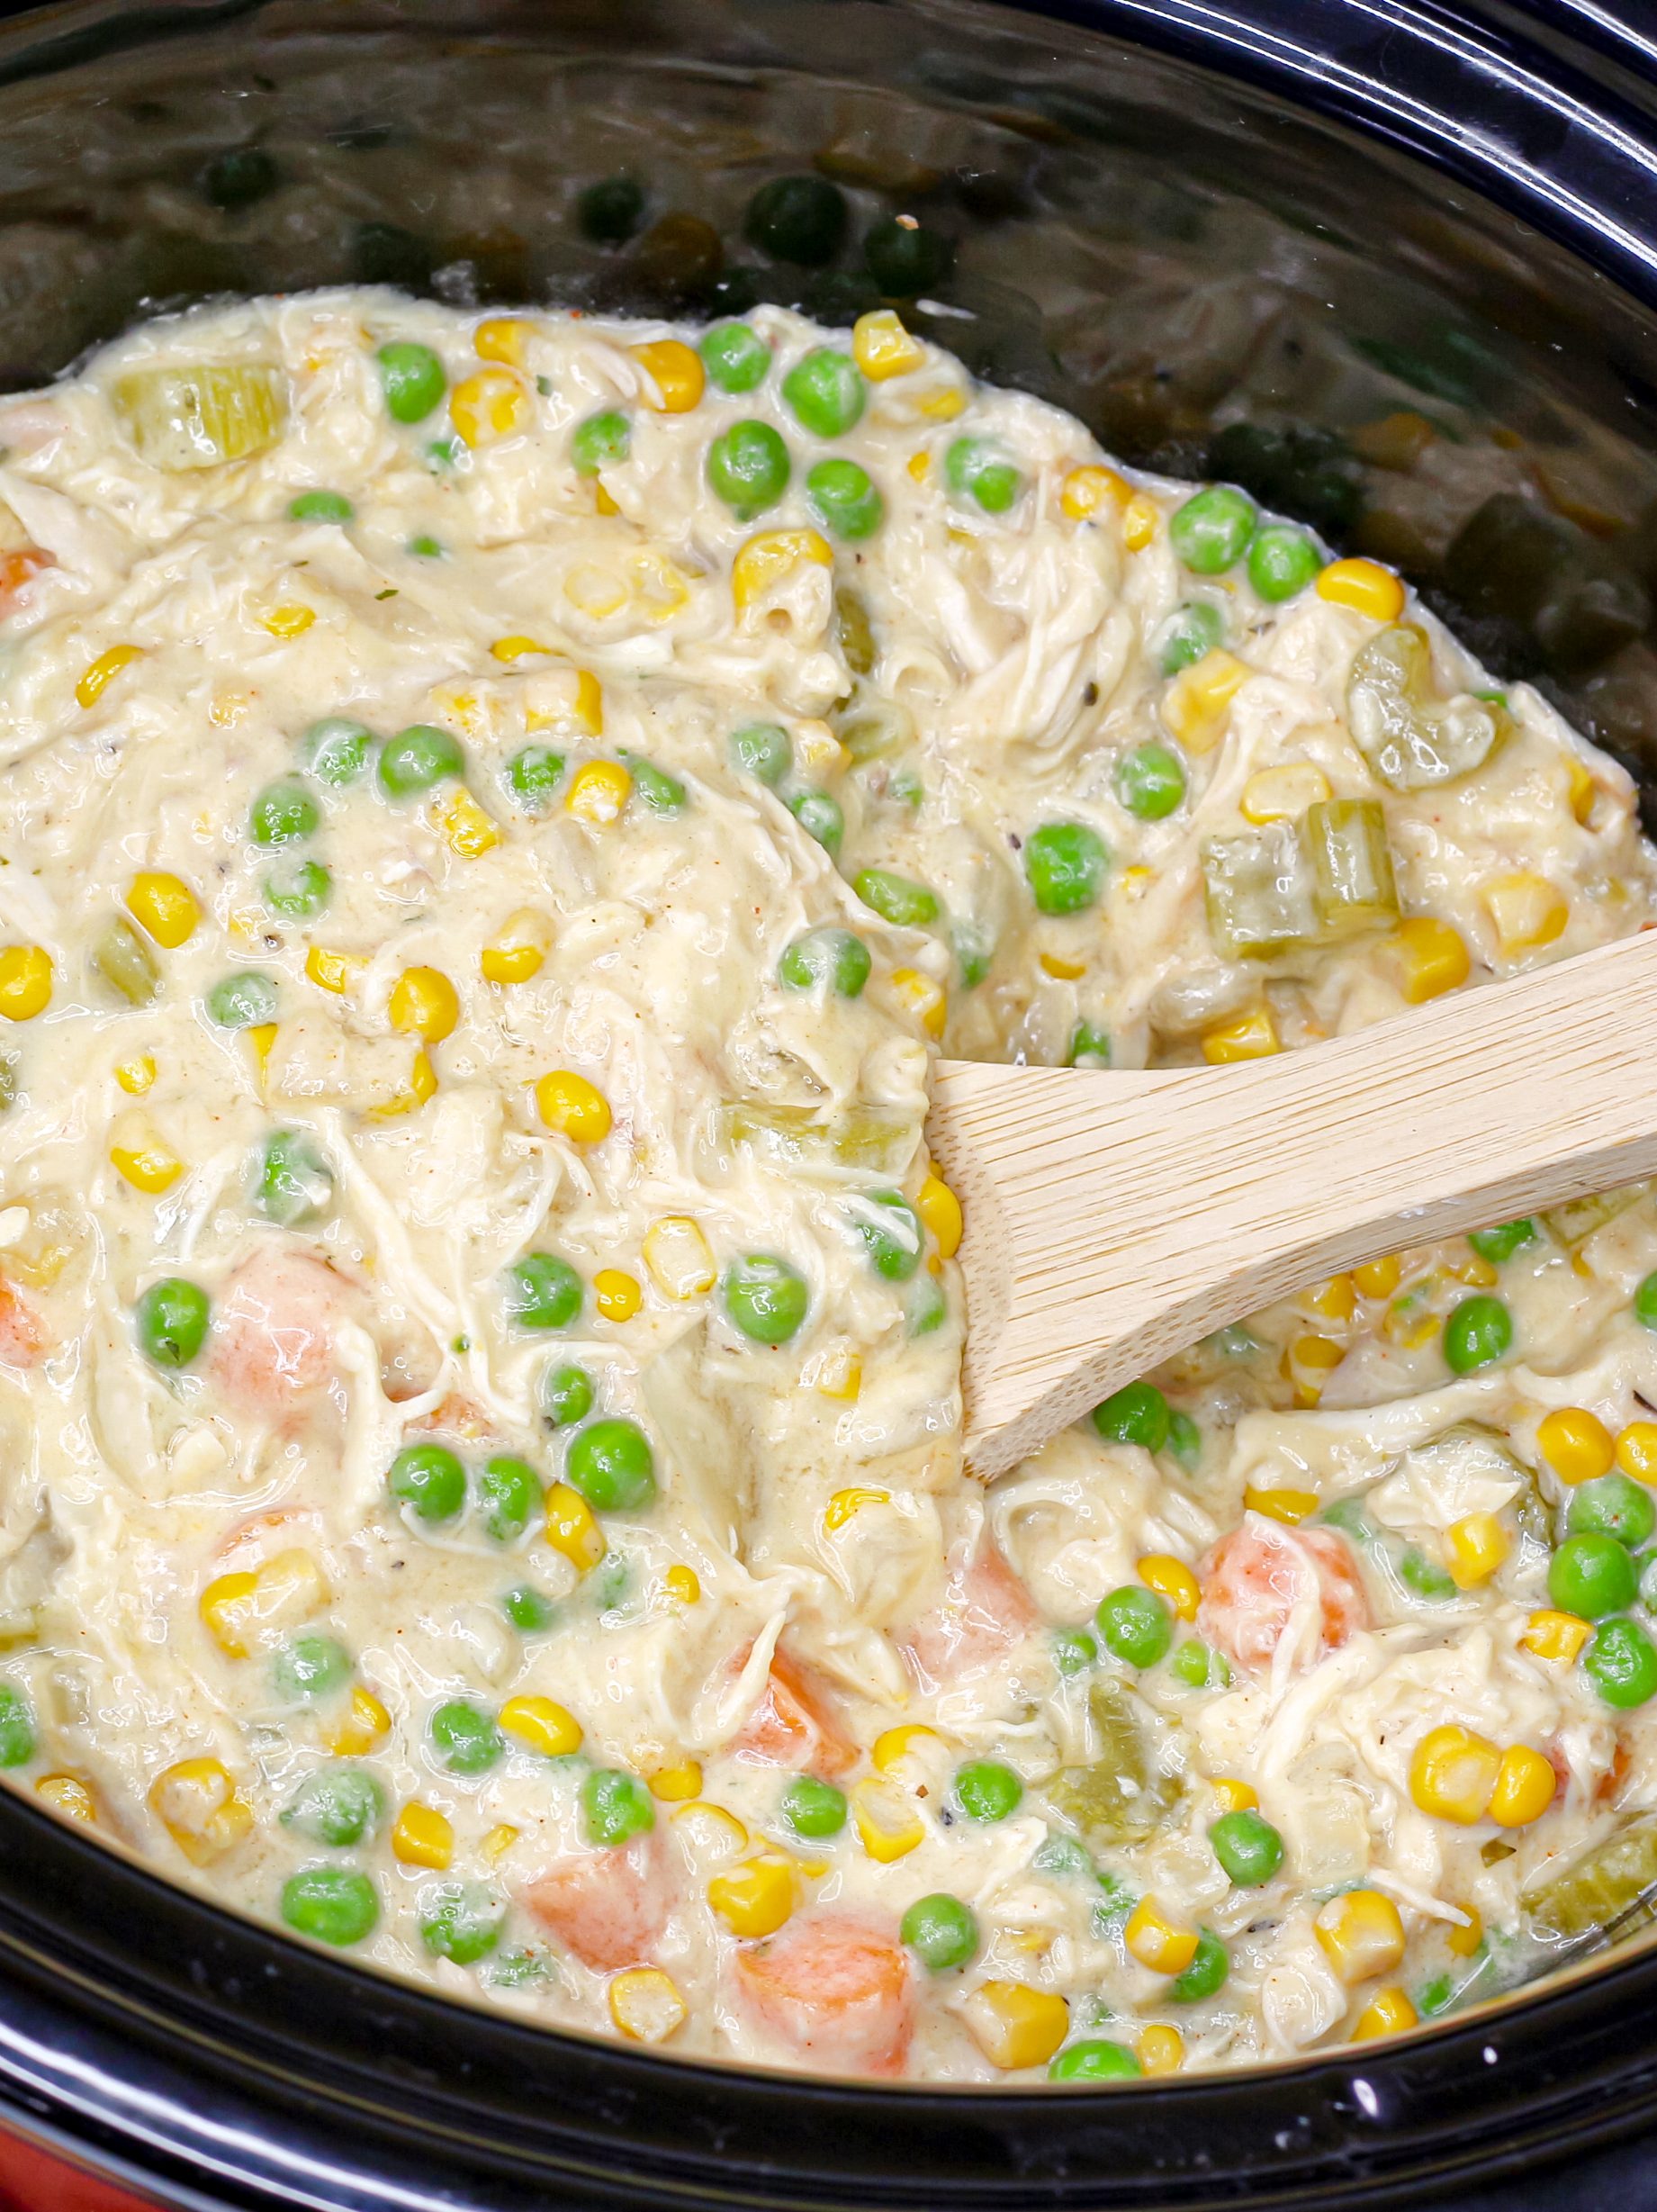 Add frozen peas, and shredded chicken and cook 1 hour longer or till heated through